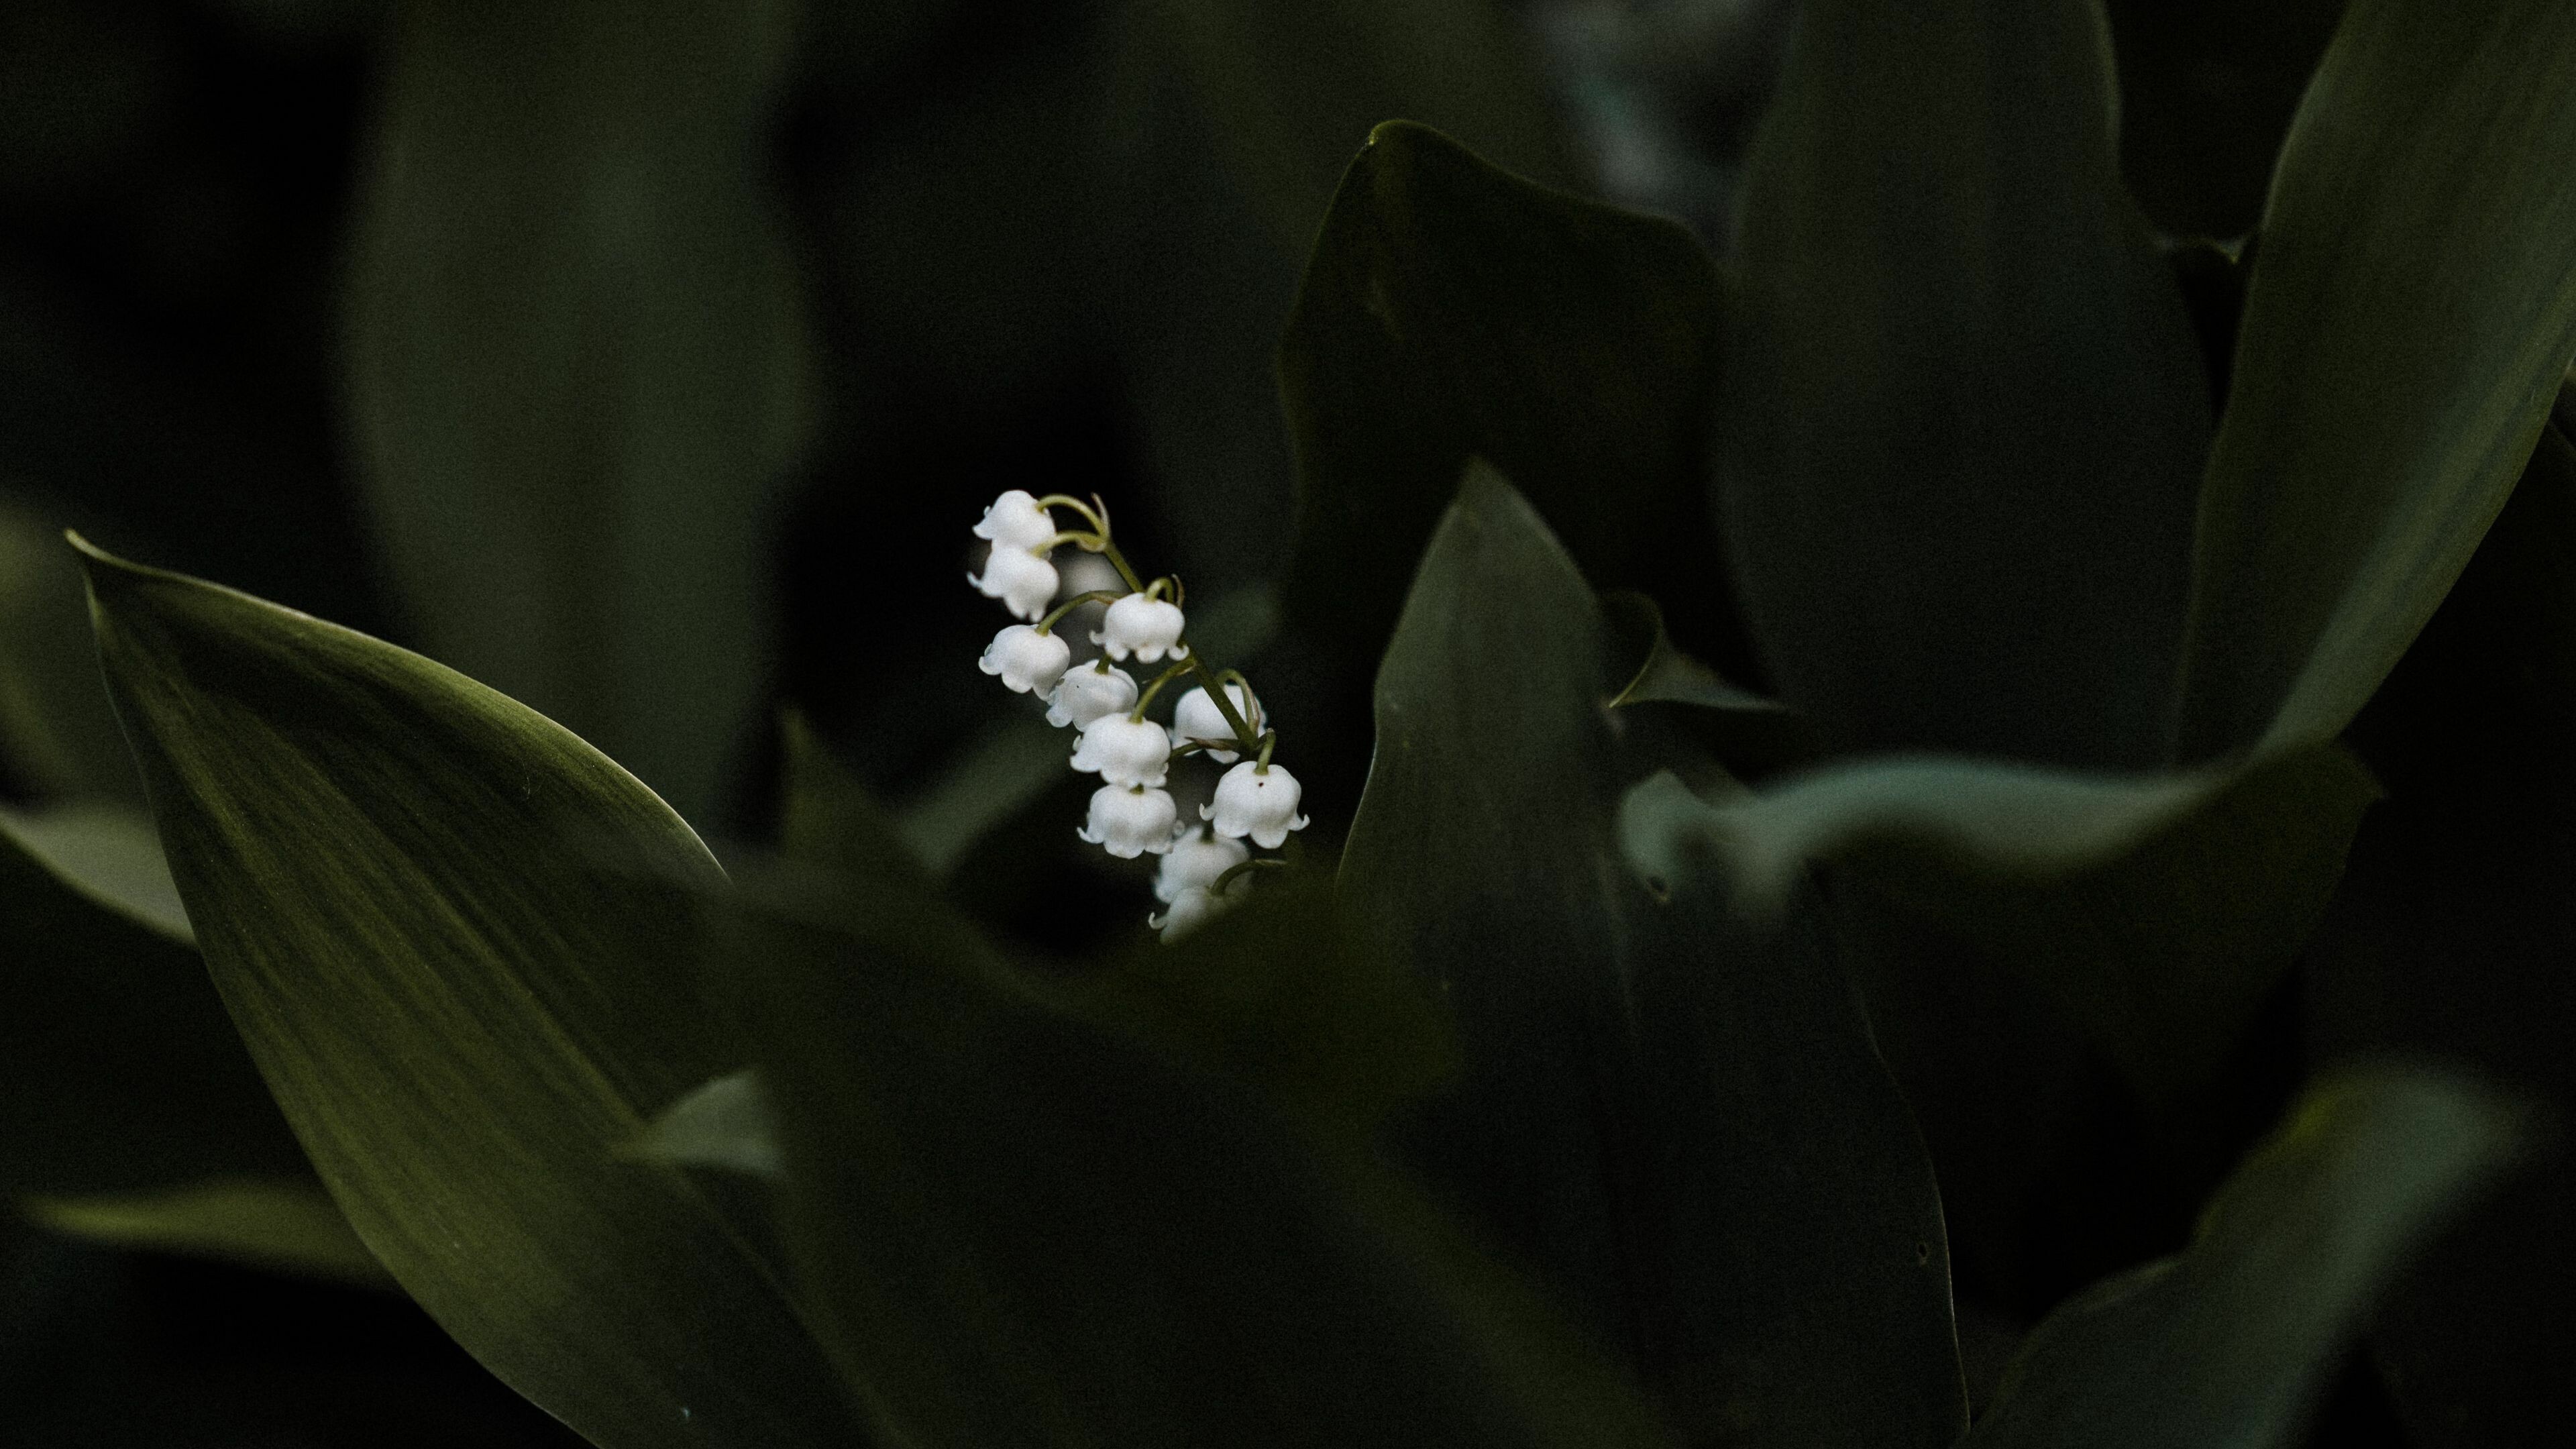 Lily of the Valley: A low-growing, spreading plant that comes up year after year in late spring. 3840x2160 4K Wallpaper.